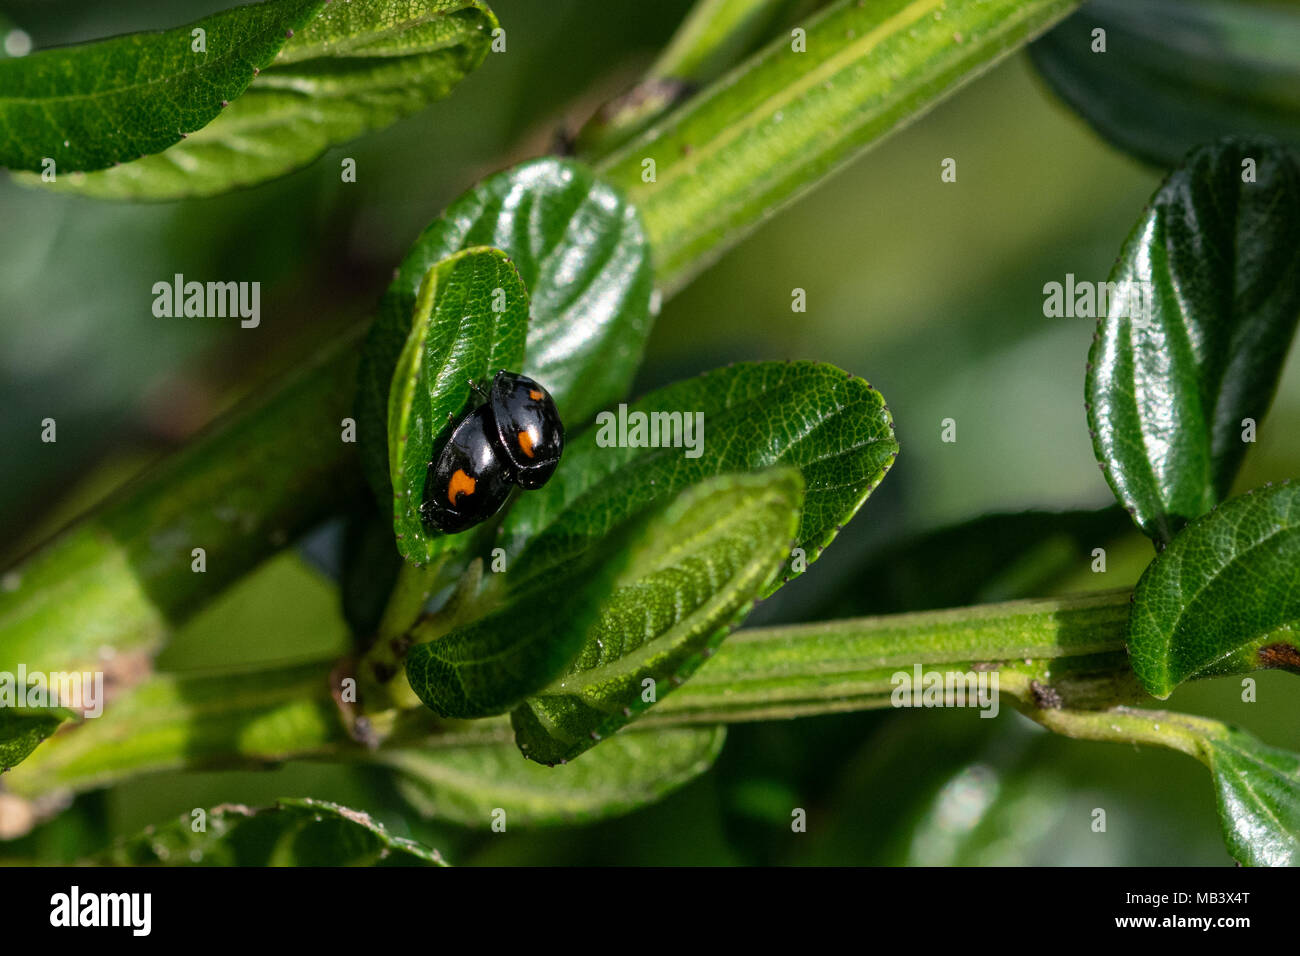 Pair of mating pine ladybirds on new green leaves. Pine ladybirds are native to the UK, small with black shells and two - four red spots Stock Photo